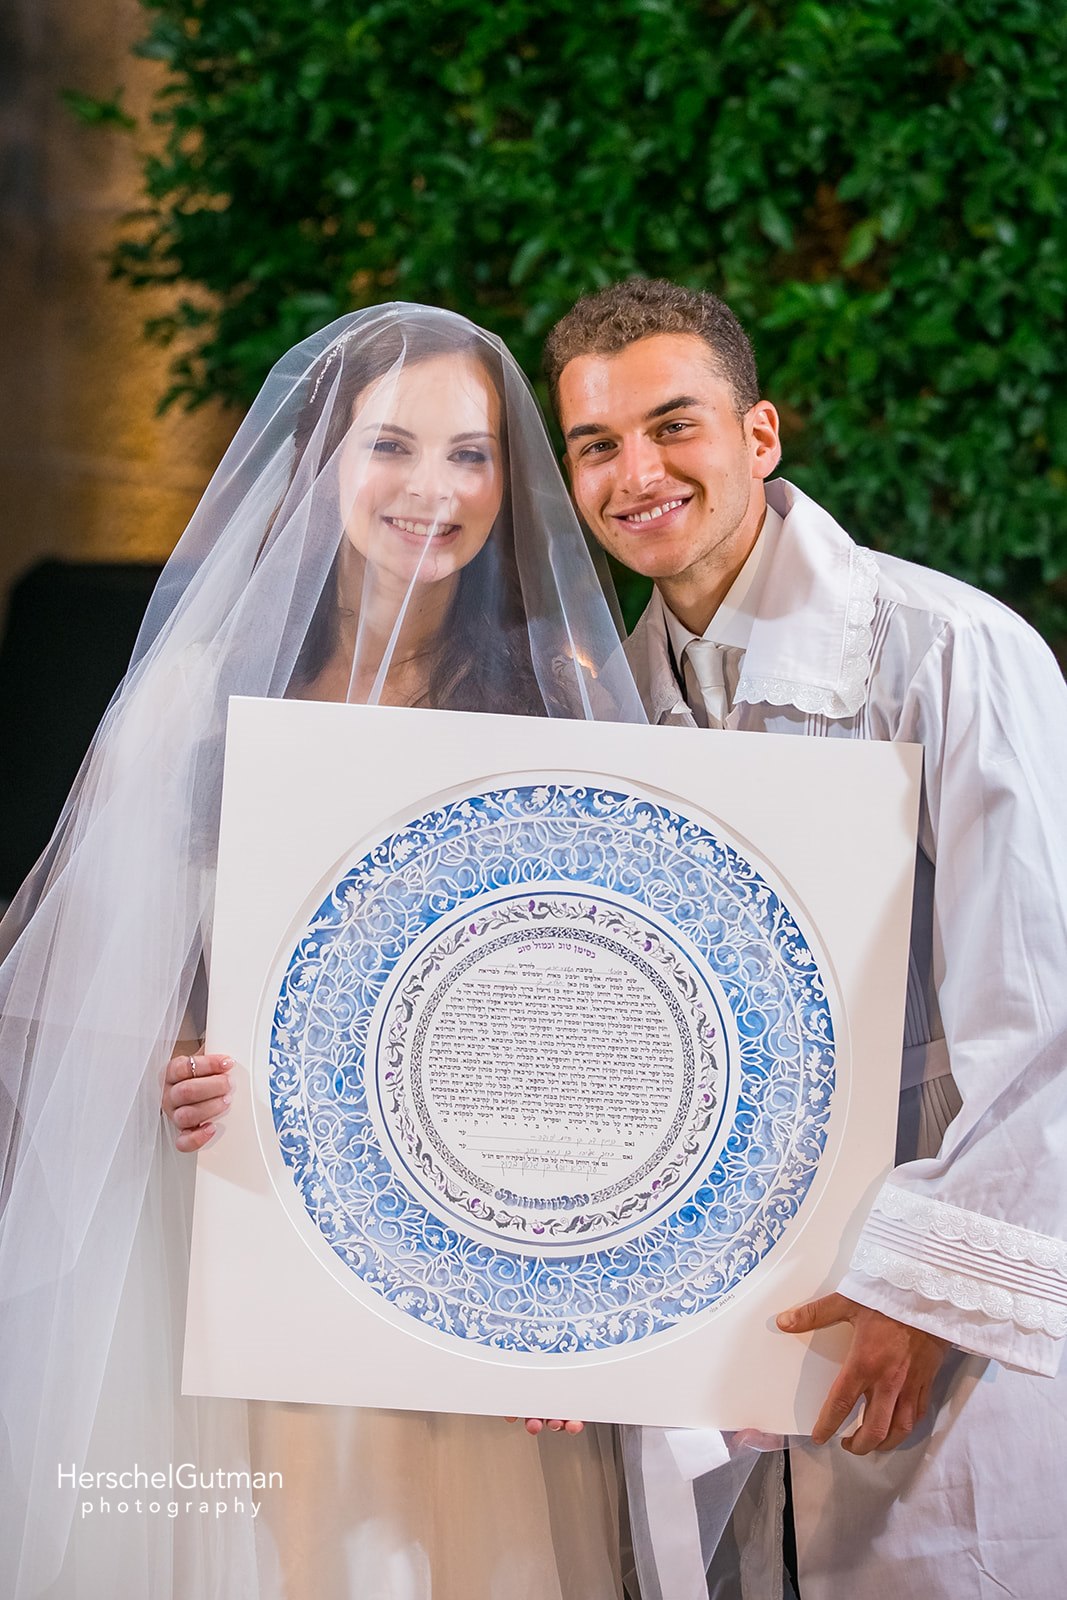 An emotional image of a couple reading their Ketubah, clearly moved by the promises within.